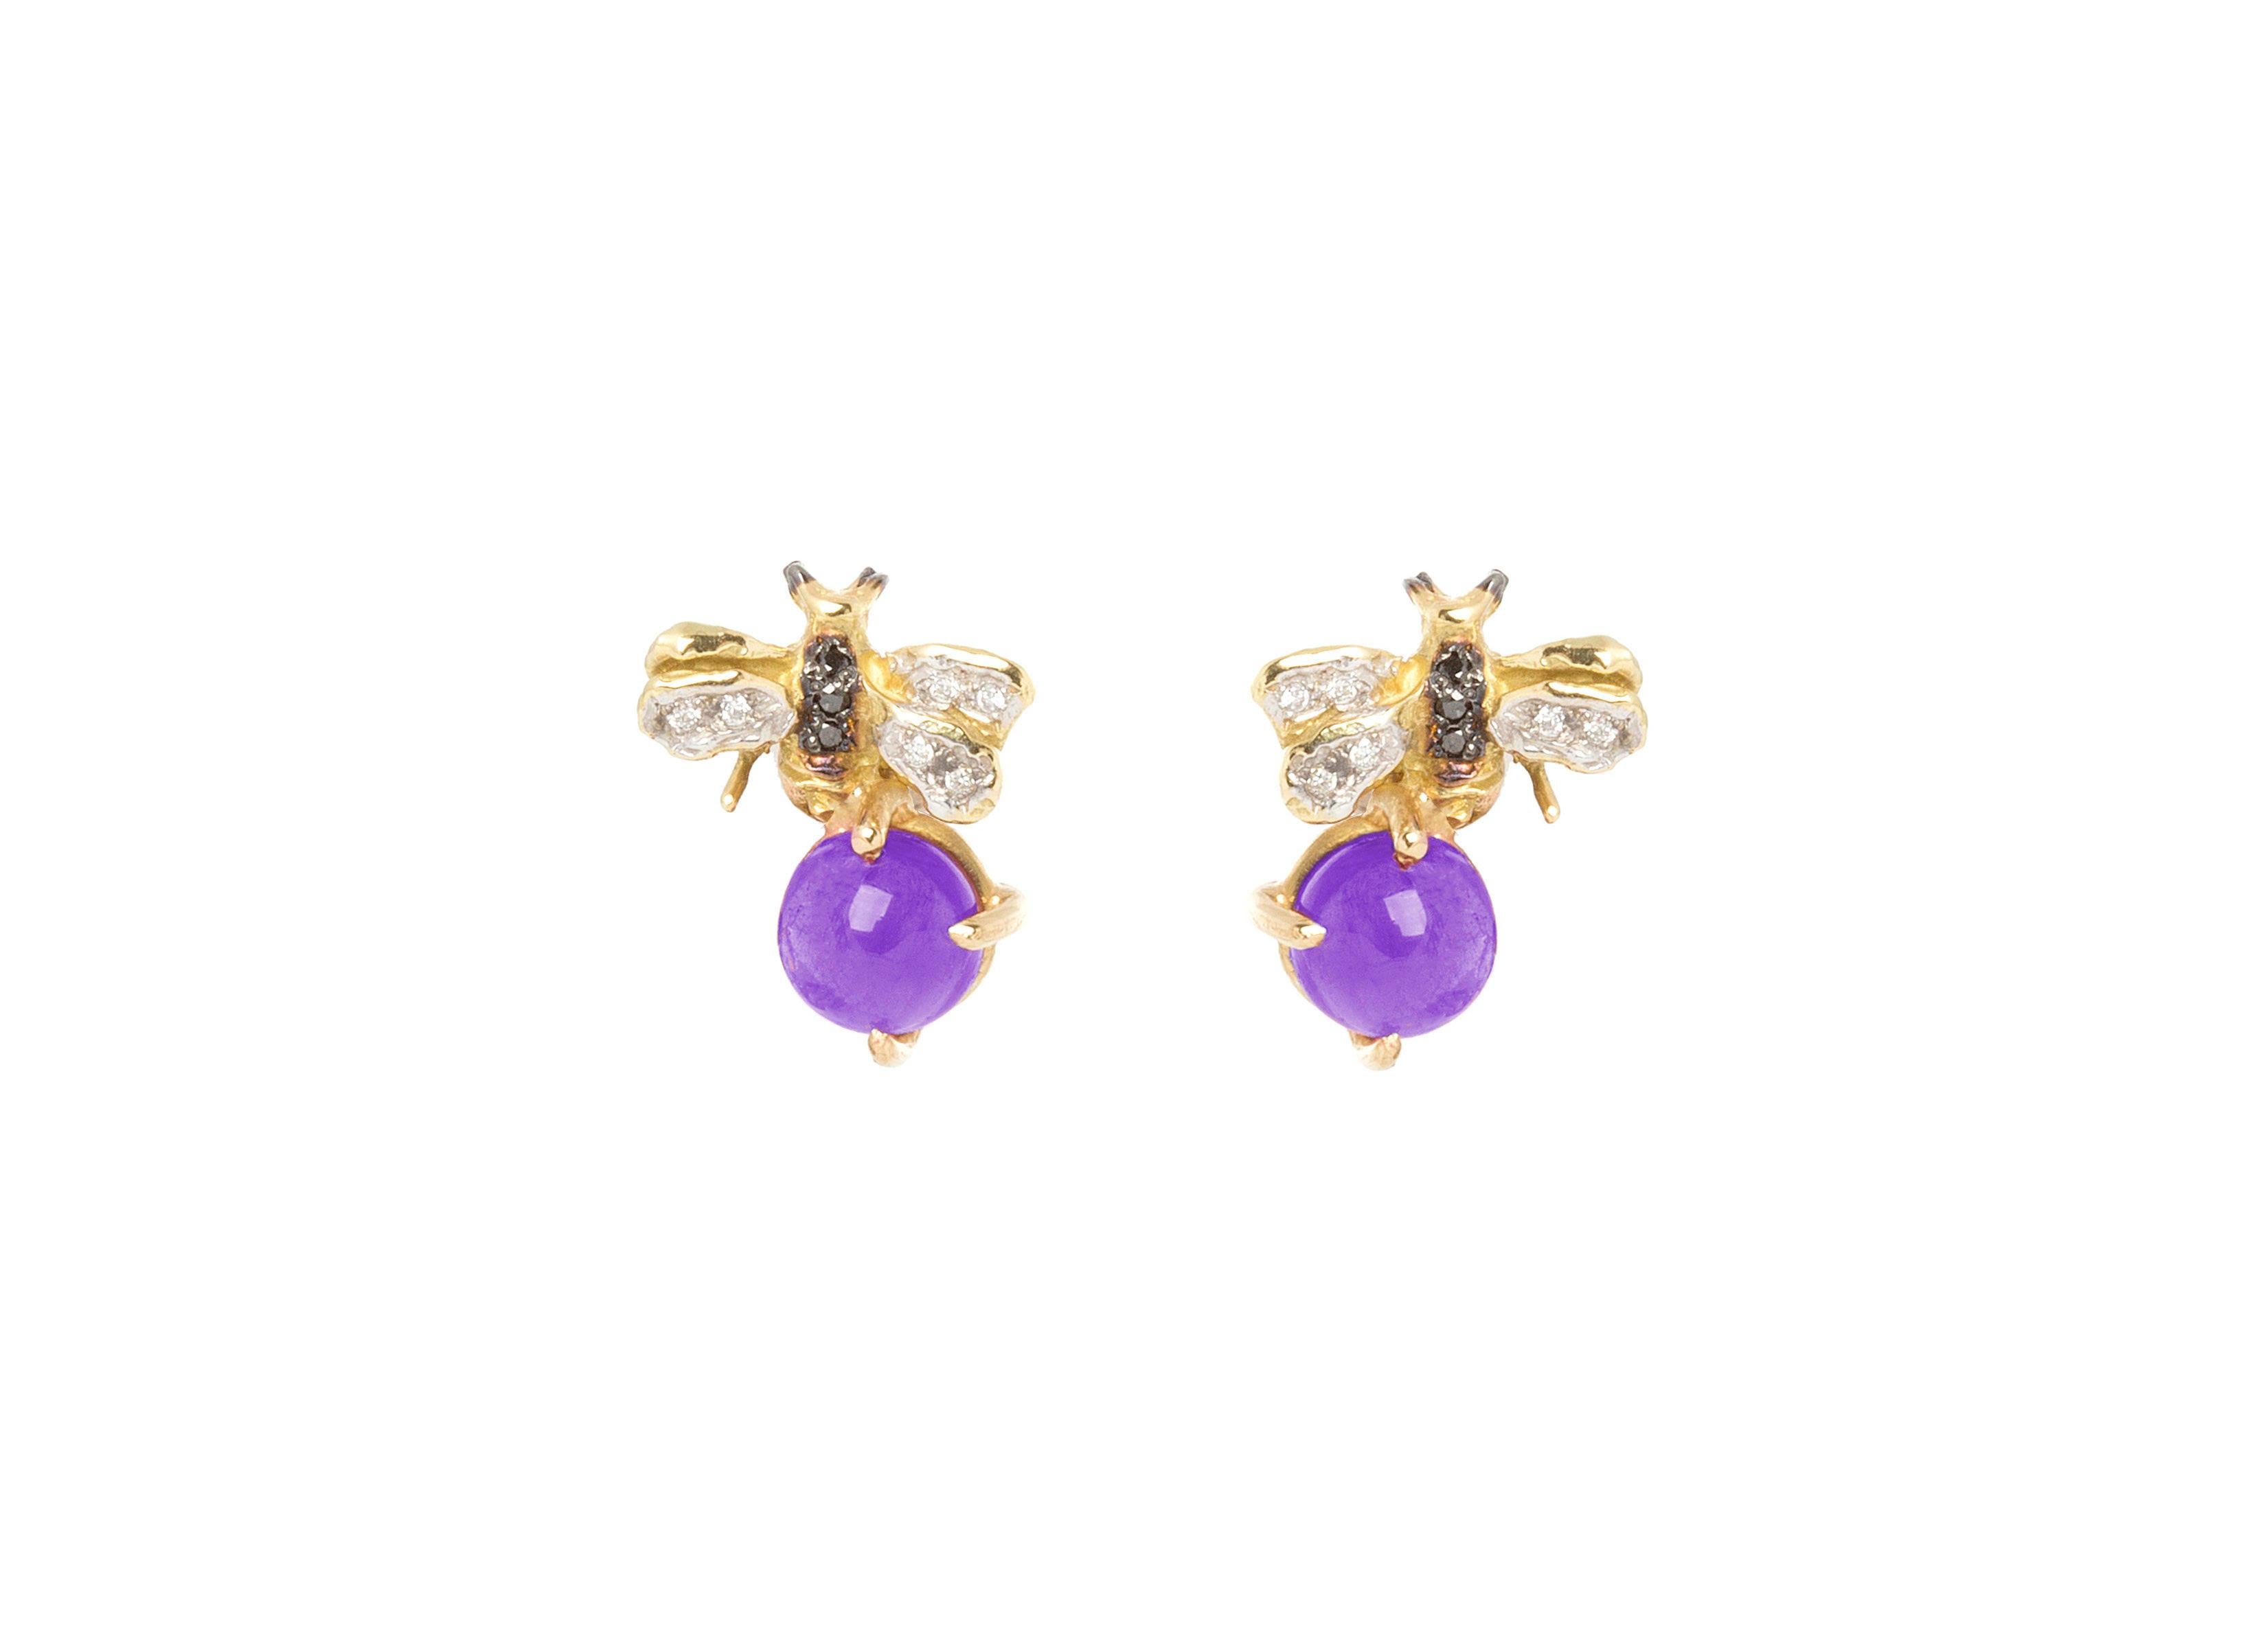 18 Karat Yellow Gold Amethyst 0.10 Karats White Diamond 0.06 Karats Black Diamonds Bees Handcrafted Stud Earrings
Here there is a pair of Little Bees Stud Earrings handcrafted in 18 Karats Yellow Gold and adorned with a beautiful violet amethyst